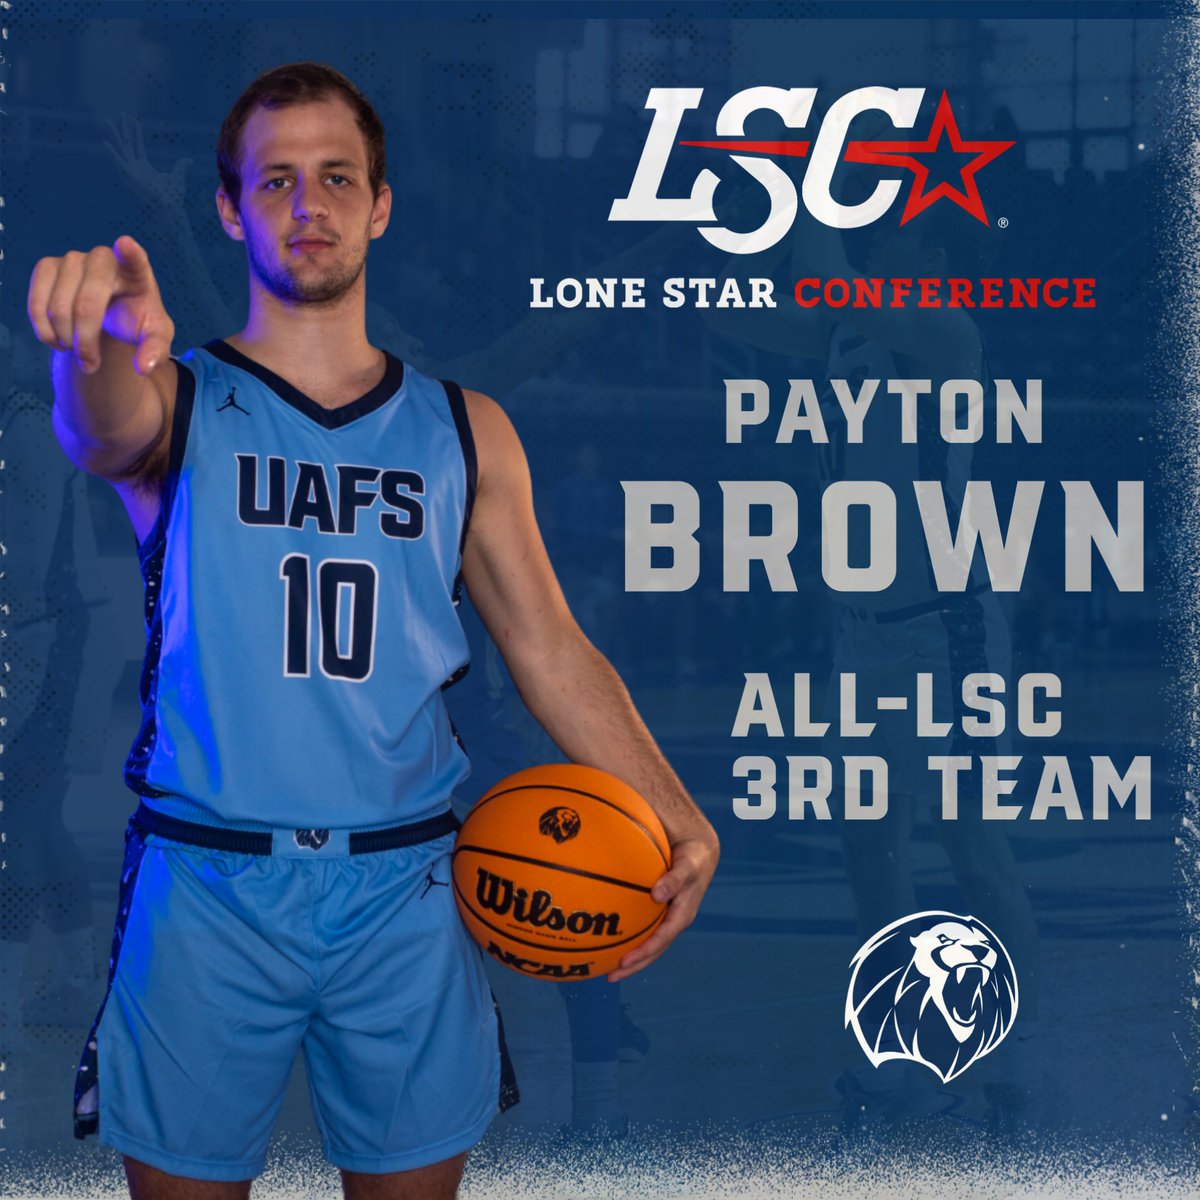 Congrats to @UAFSMBB guard Payton Brown for being selected to the All-LSC Third Team! 📎: bit.ly/49Fb0ut #RunToTheRoar